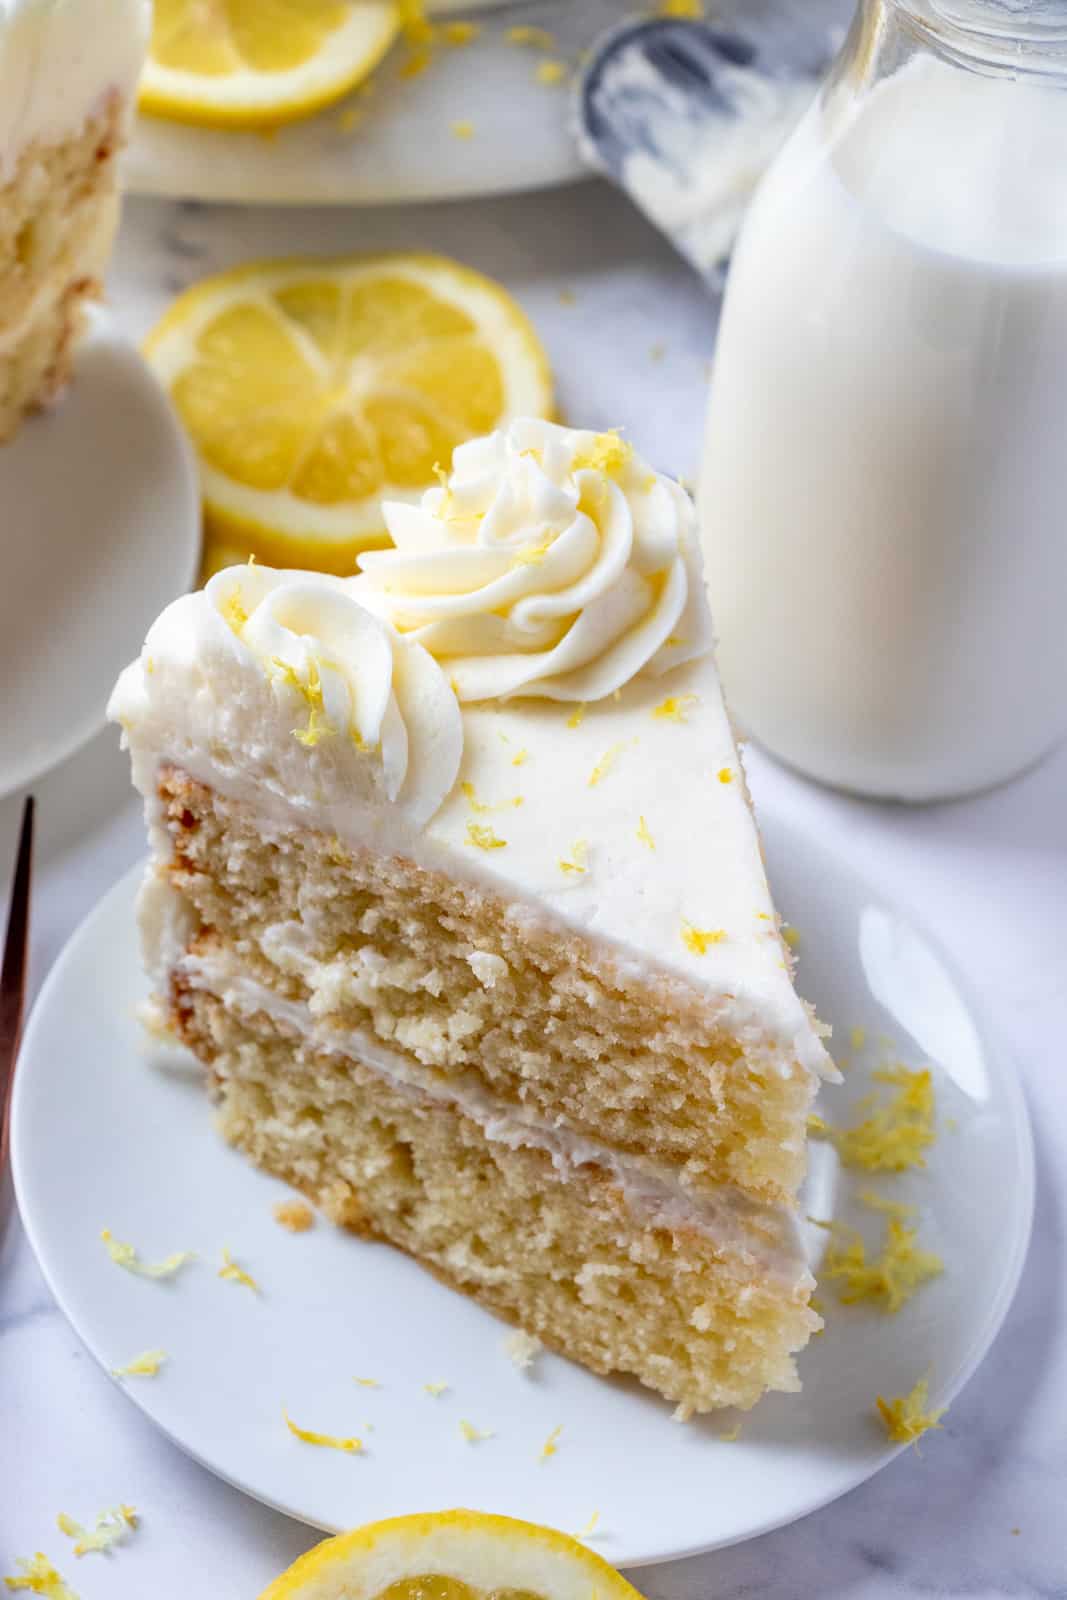 Slice of lemon cake on white plate overhead photo showing top with lemons and milk in background